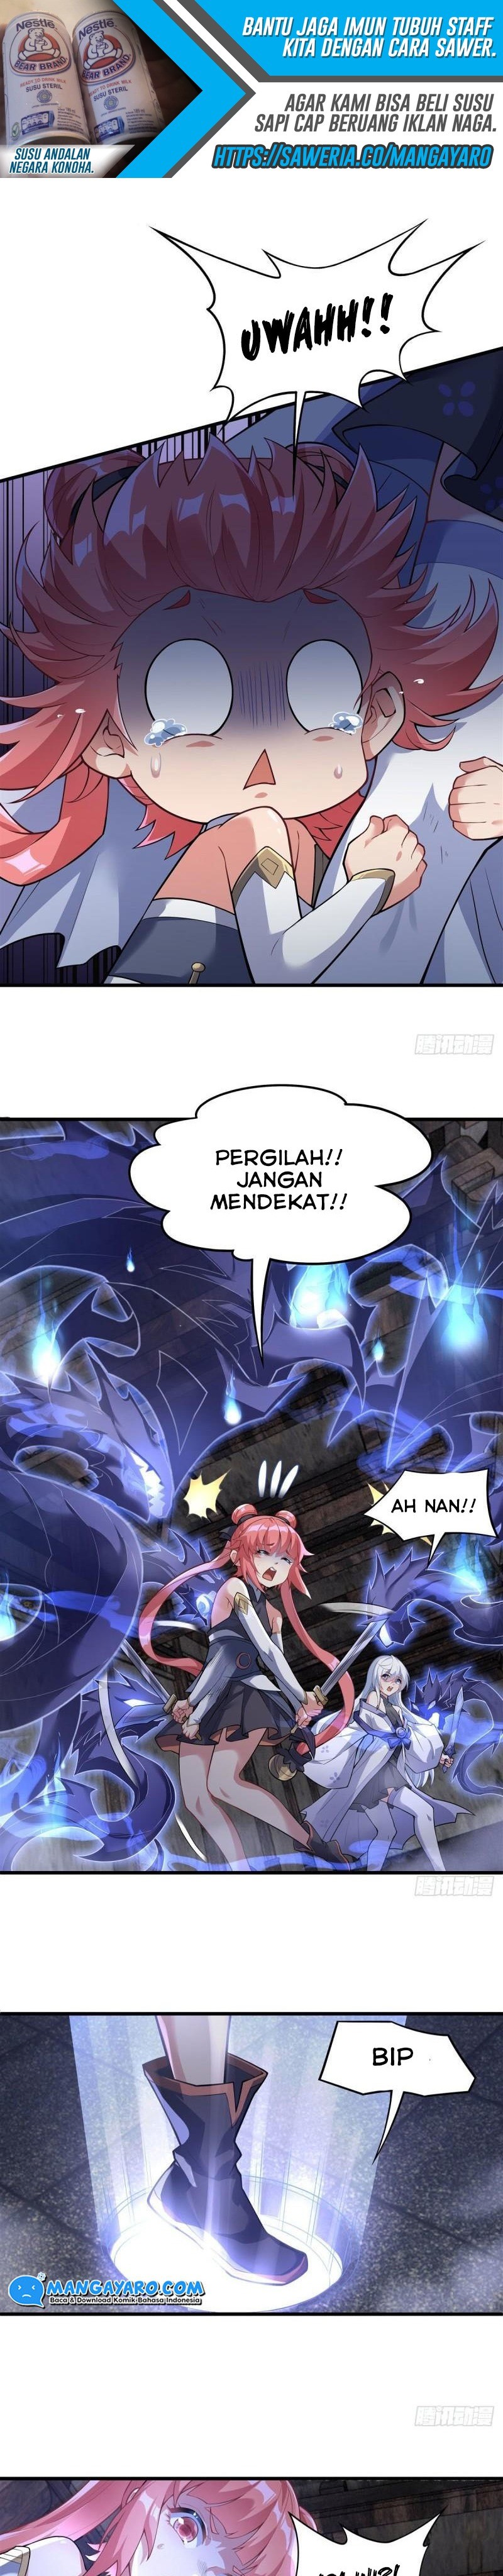 Dilarang COPAS - situs resmi www.mangacanblog.com - Komik my female apprentices are all big shots from the future 053 - chapter 53 54 Indonesia my female apprentices are all big shots from the future 053 - chapter 53 Terbaru 7|Baca Manga Komik Indonesia|Mangacan